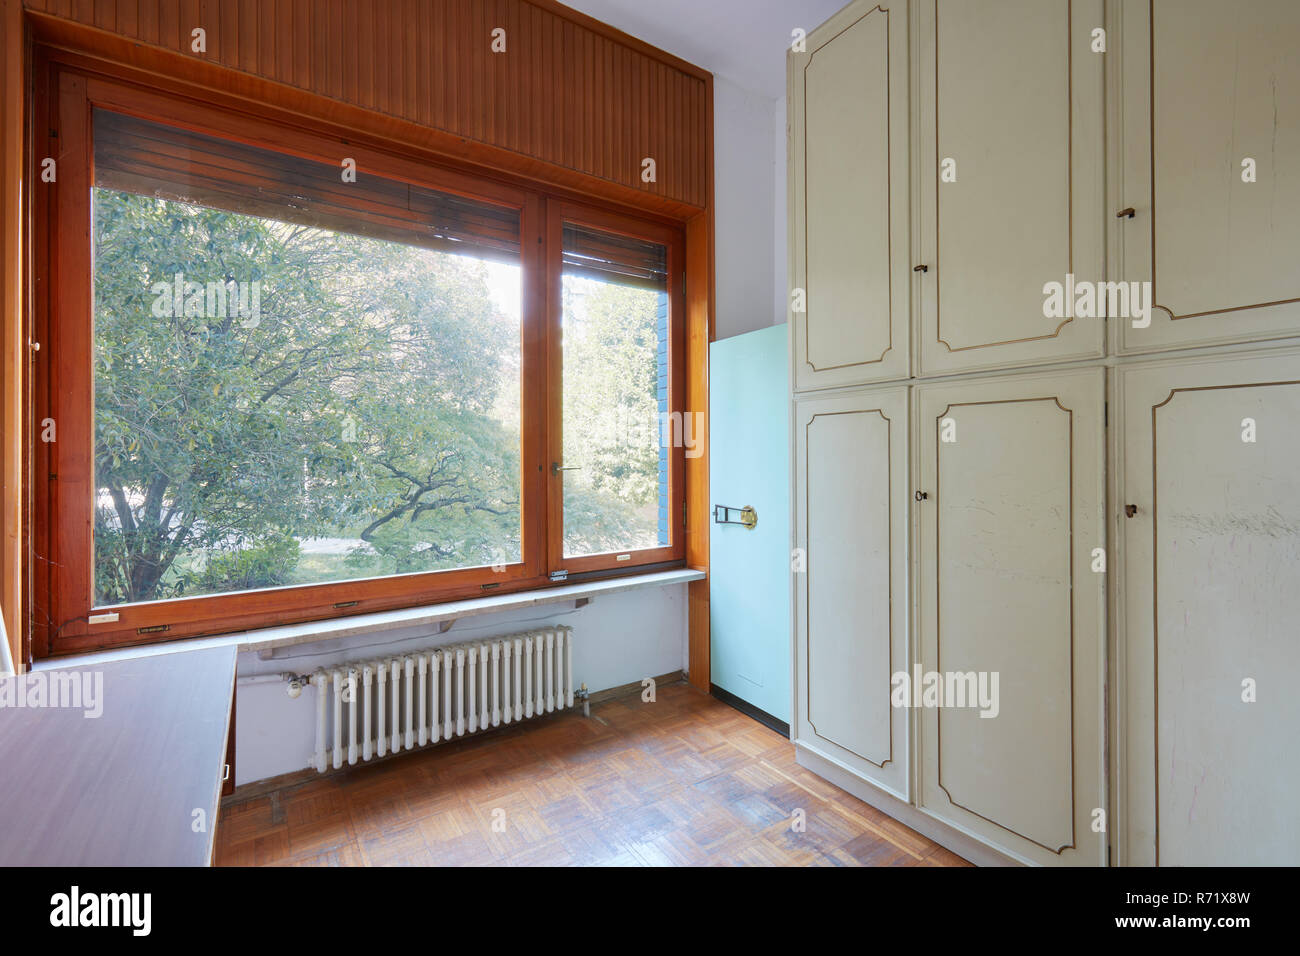 Room with wardrobe and large window, apartment interior in old house with garden Stock Photo